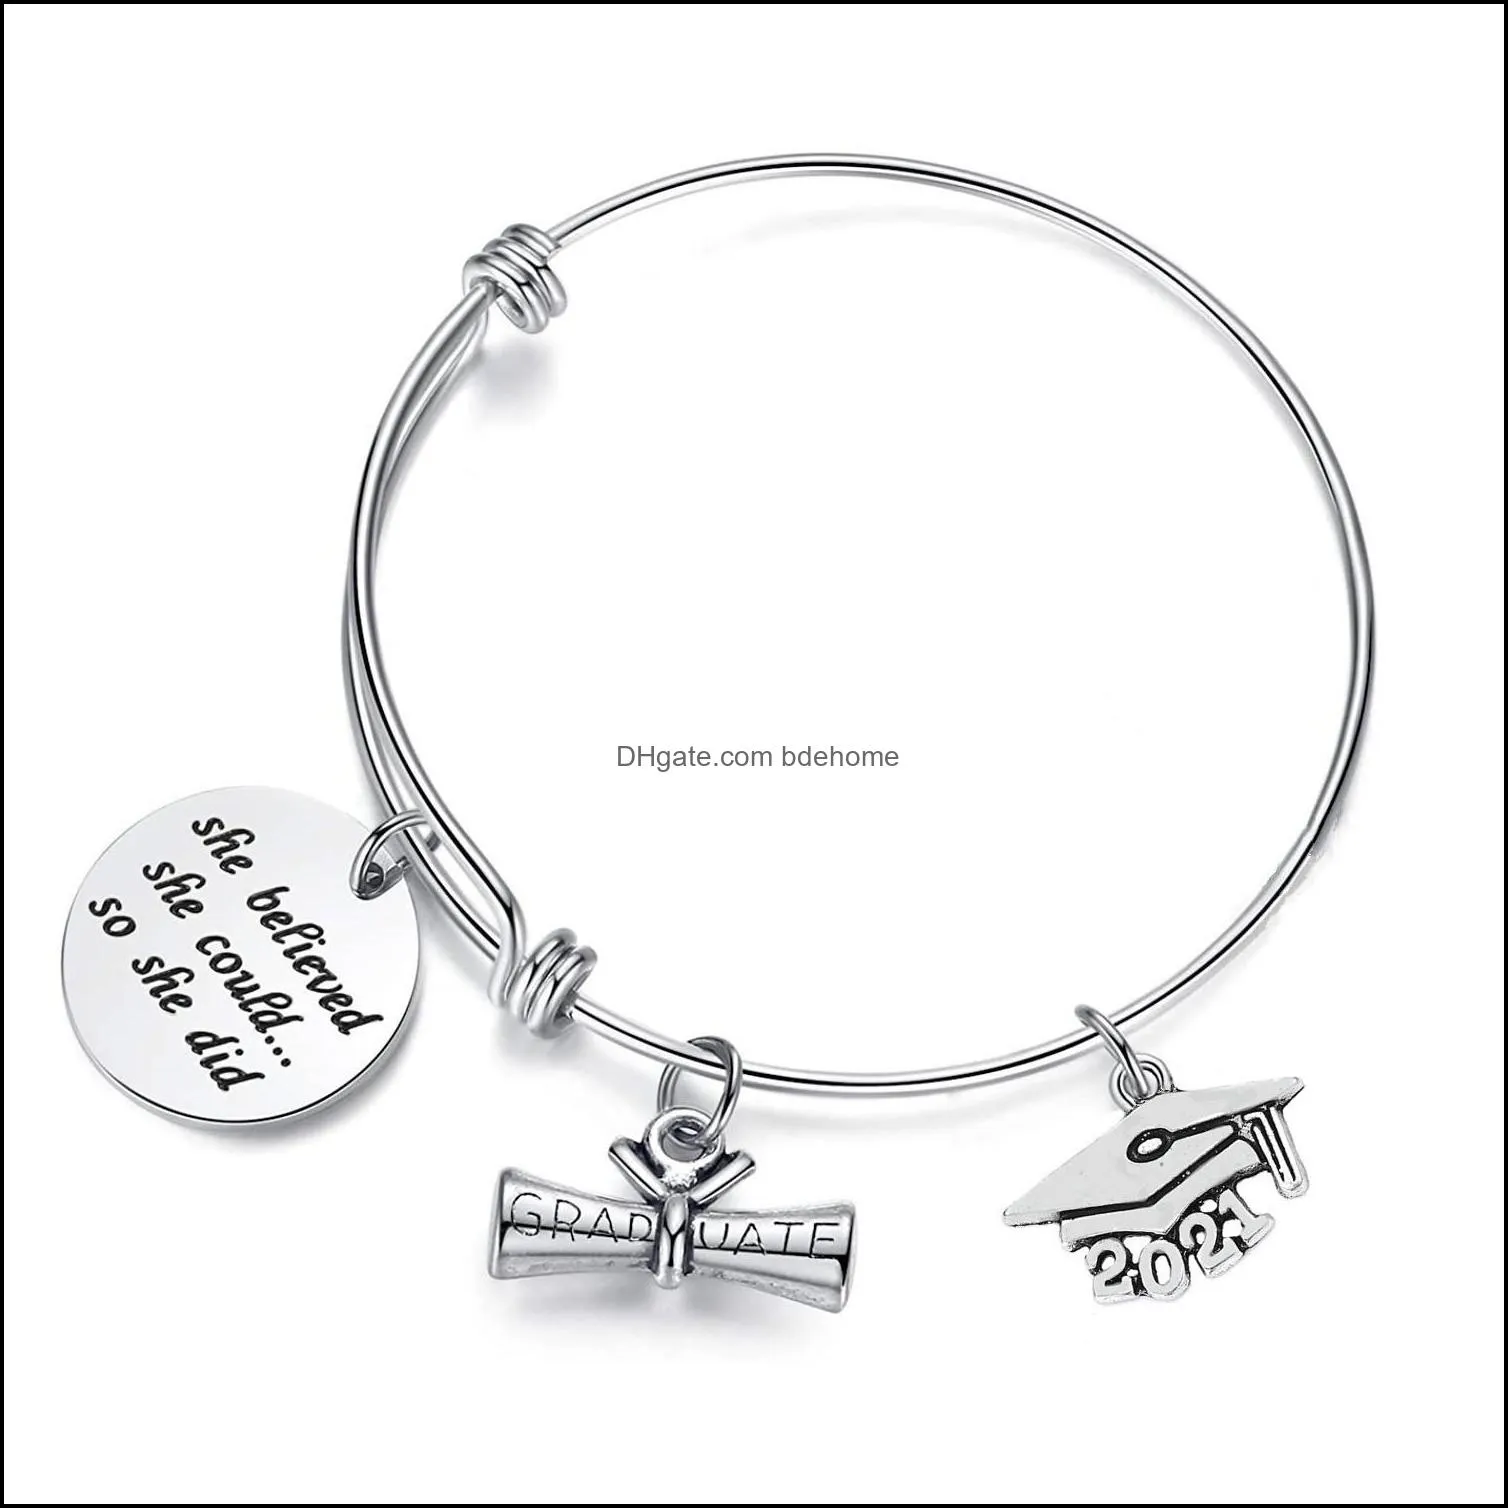 2021 stainless steel charm engraved bracelet women adjustable graduation bangle inspiration jewelry for girl boys dhs